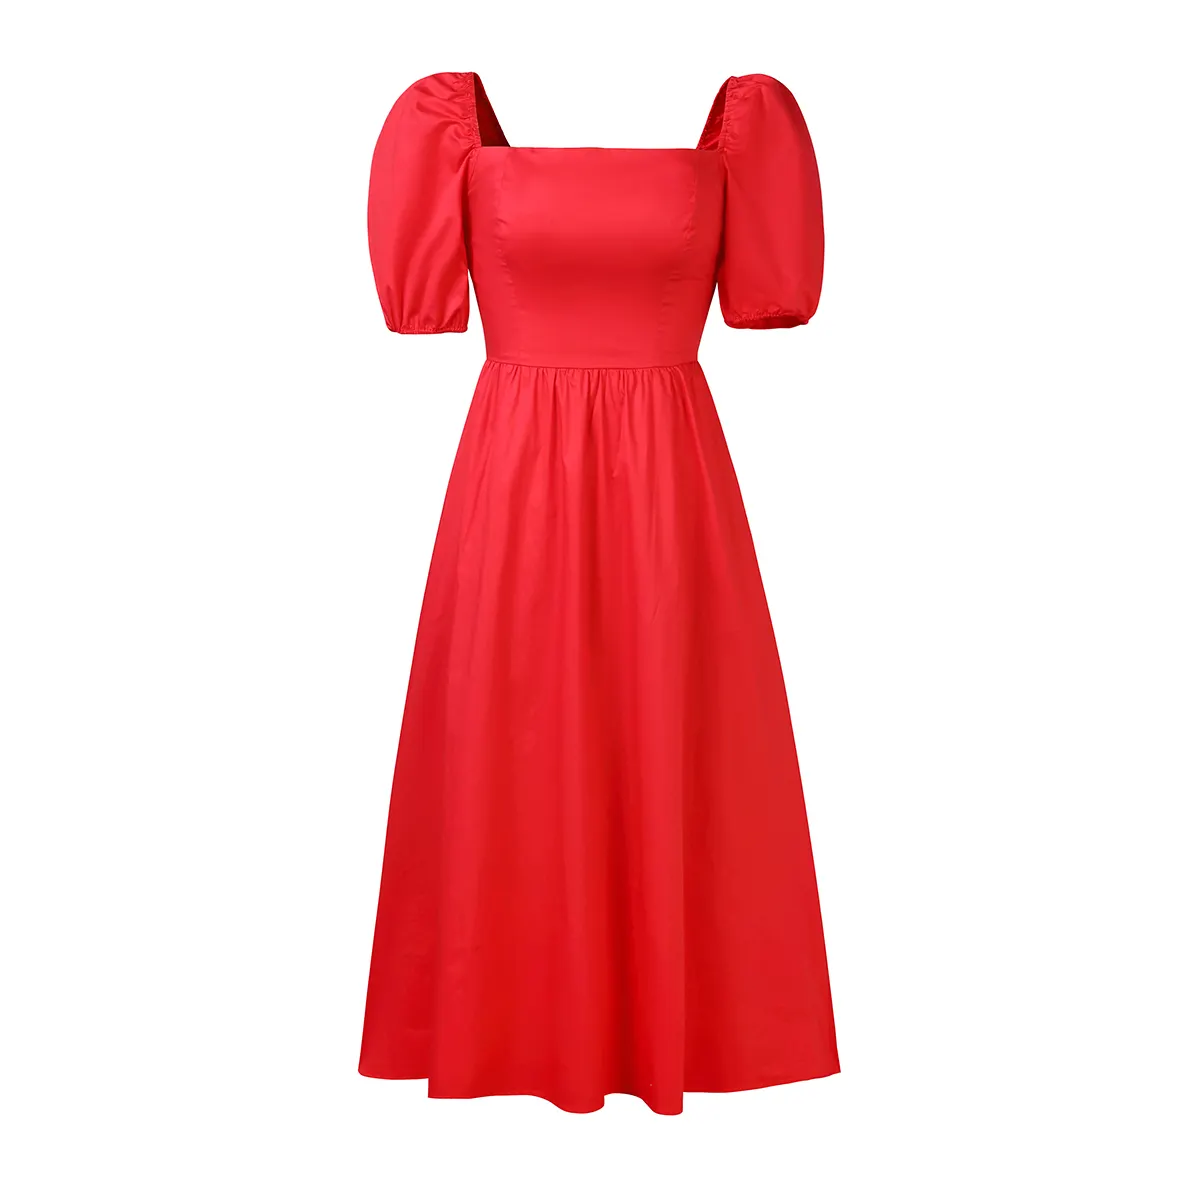 2022 SUMMER HOLIDAY DRESS CUSTOM CASUAL LONG LADY ELEGANT DRESSES WOMEN 100%COTTON RED SEXY DRESS FOR WOMEN